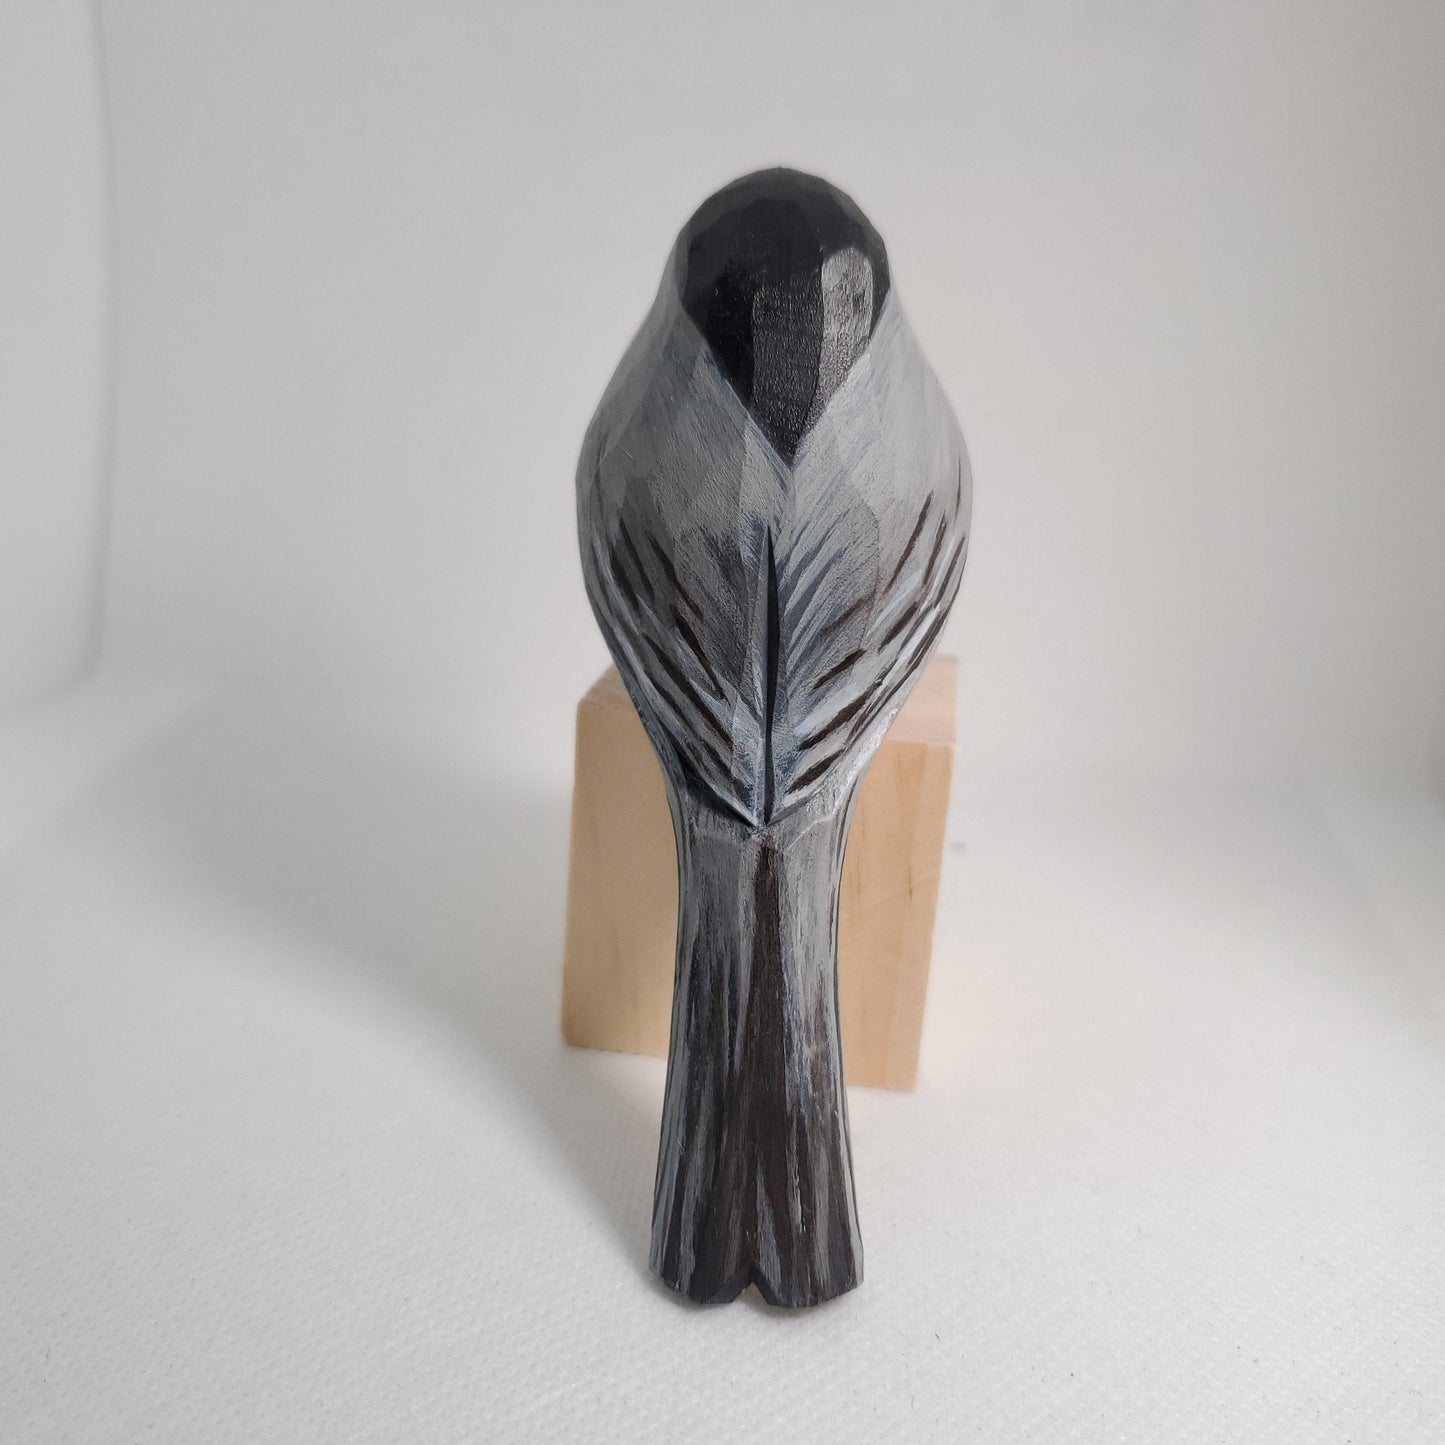 Catbird Figurine Hand Carved Painted Wooden Decor - PAINTED BIRD SHOP